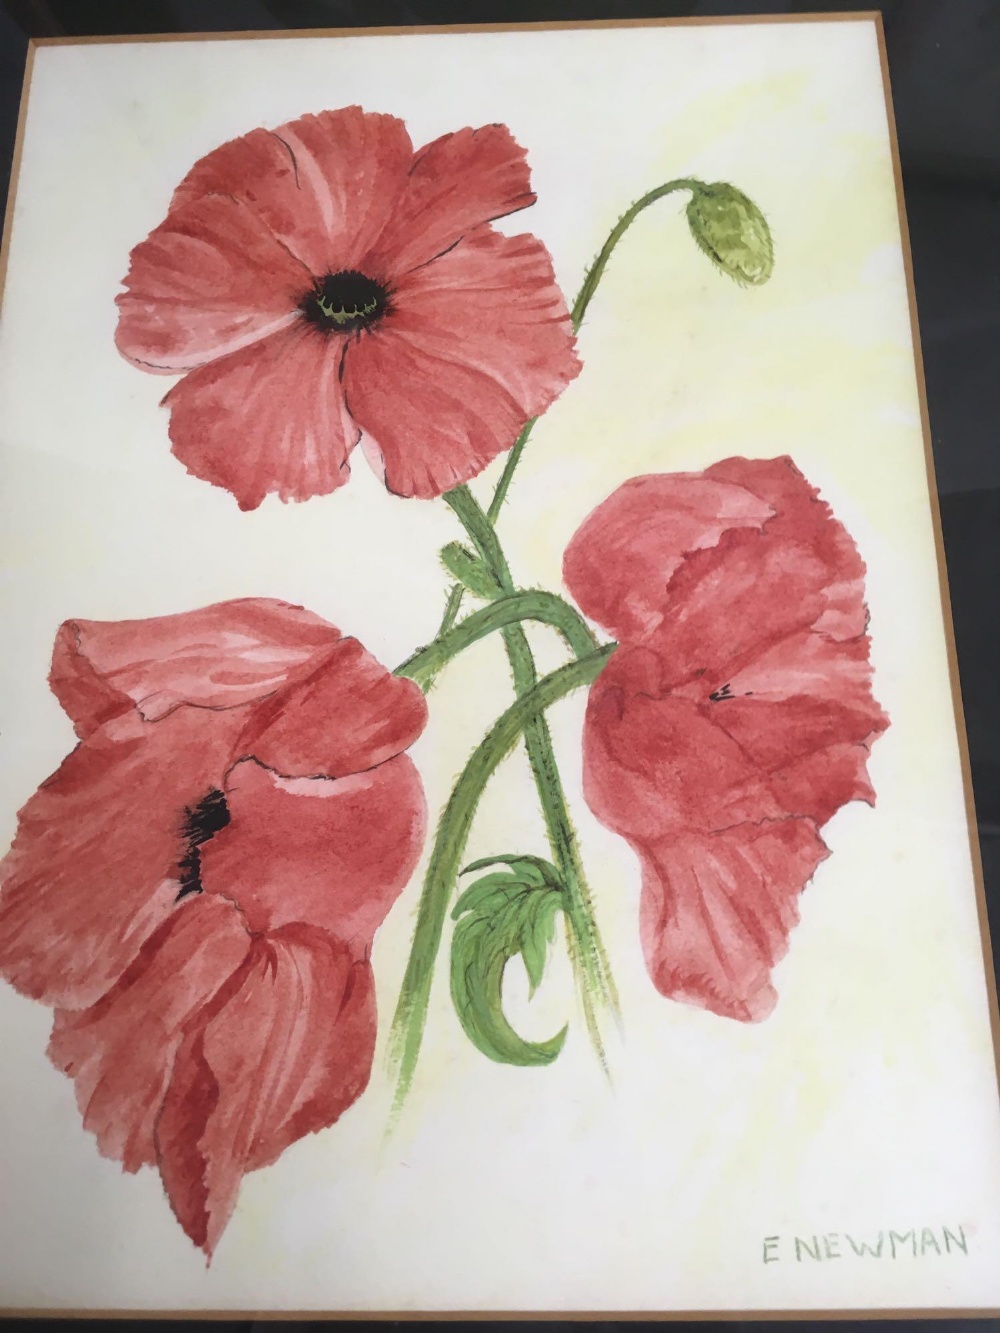 2 PAIRS OF ORIGINAL WATERCOLOURS OF FLOWERS, EACH SIGNED E NEWMAN - Image 4 of 5